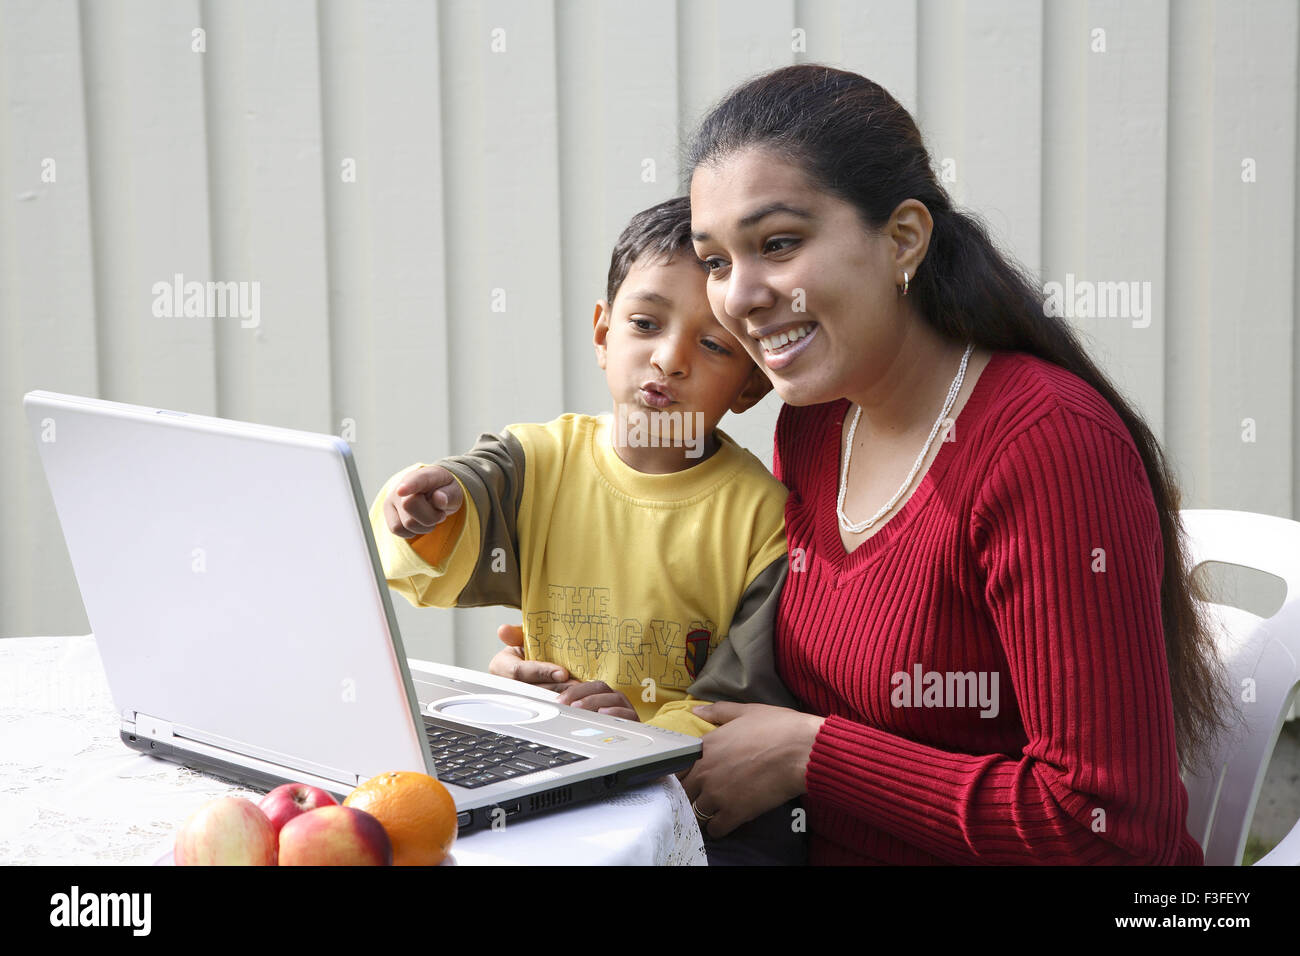 Boy pointing with index finger with mother looking at screen of laptop touching each other's heads MR#468 Stock Photo